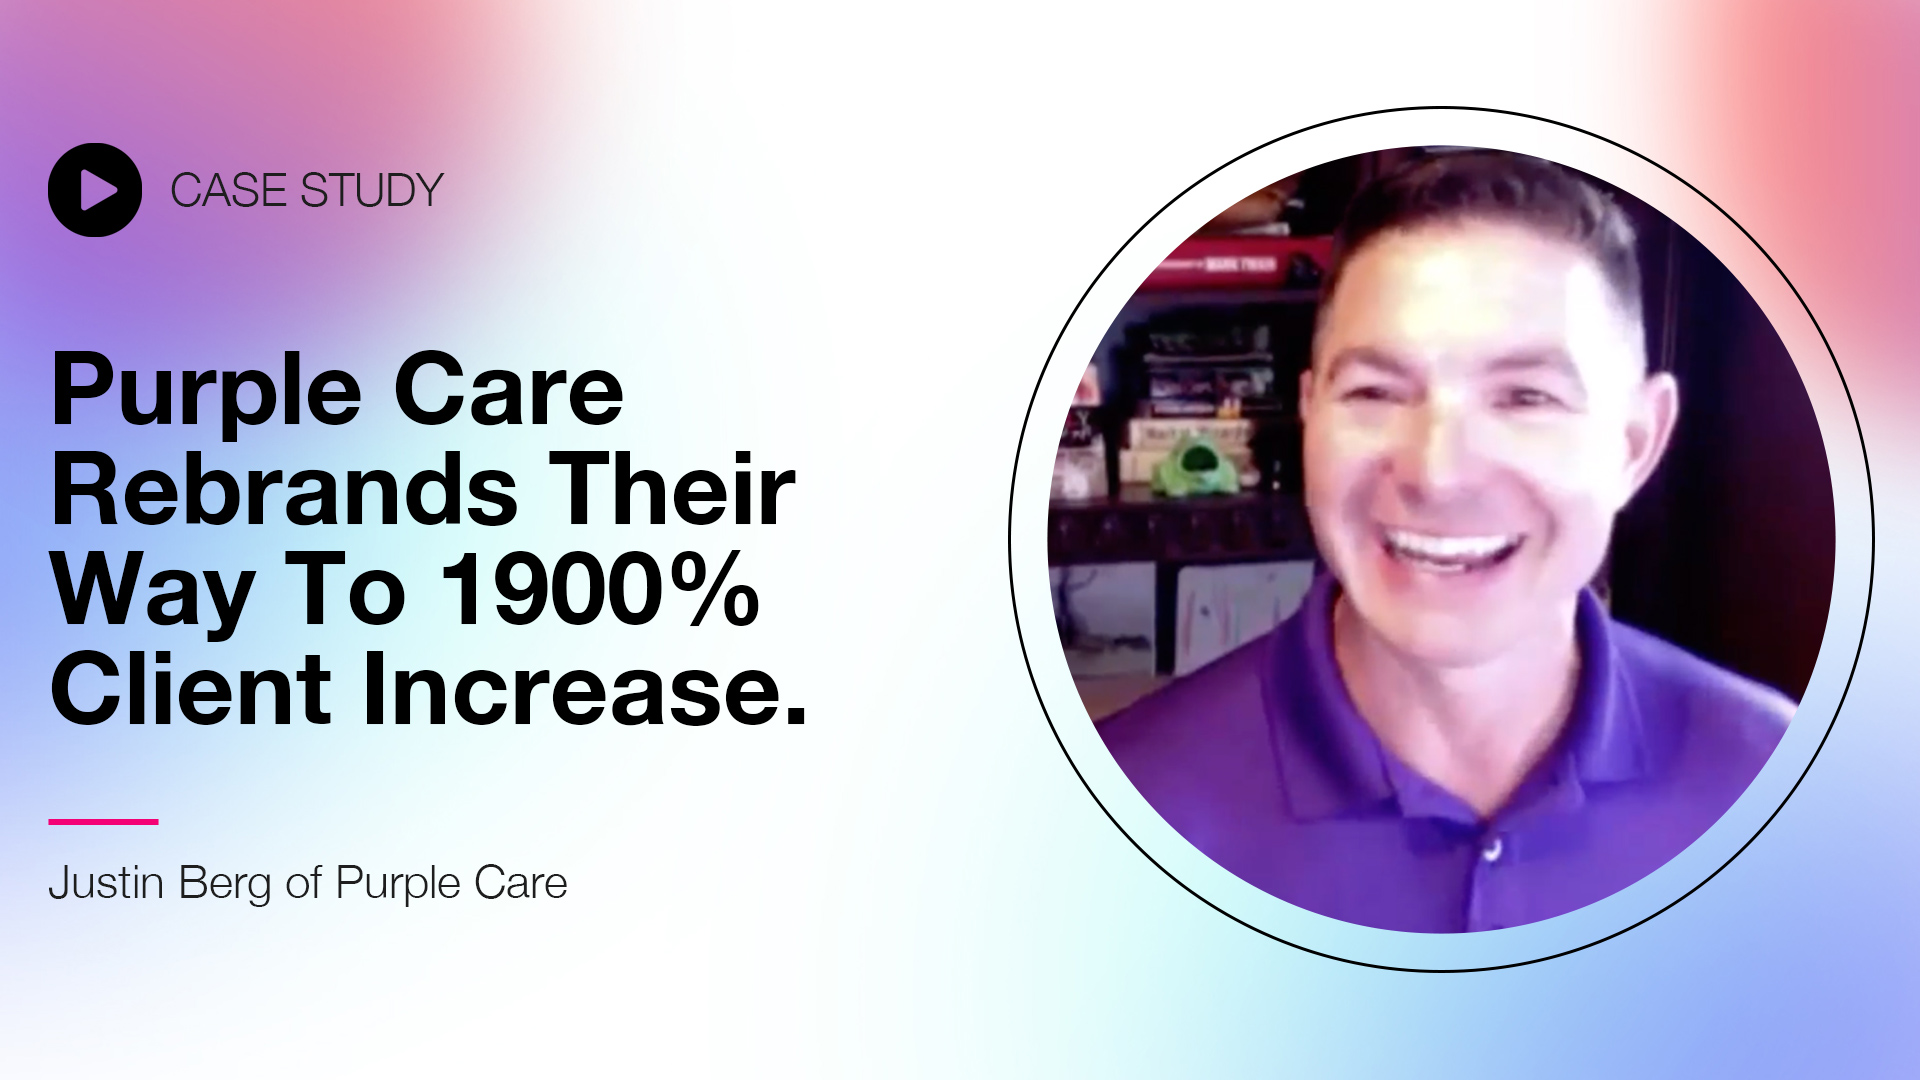 Purple Care Rebrands Their Way to 1900% Client Increase